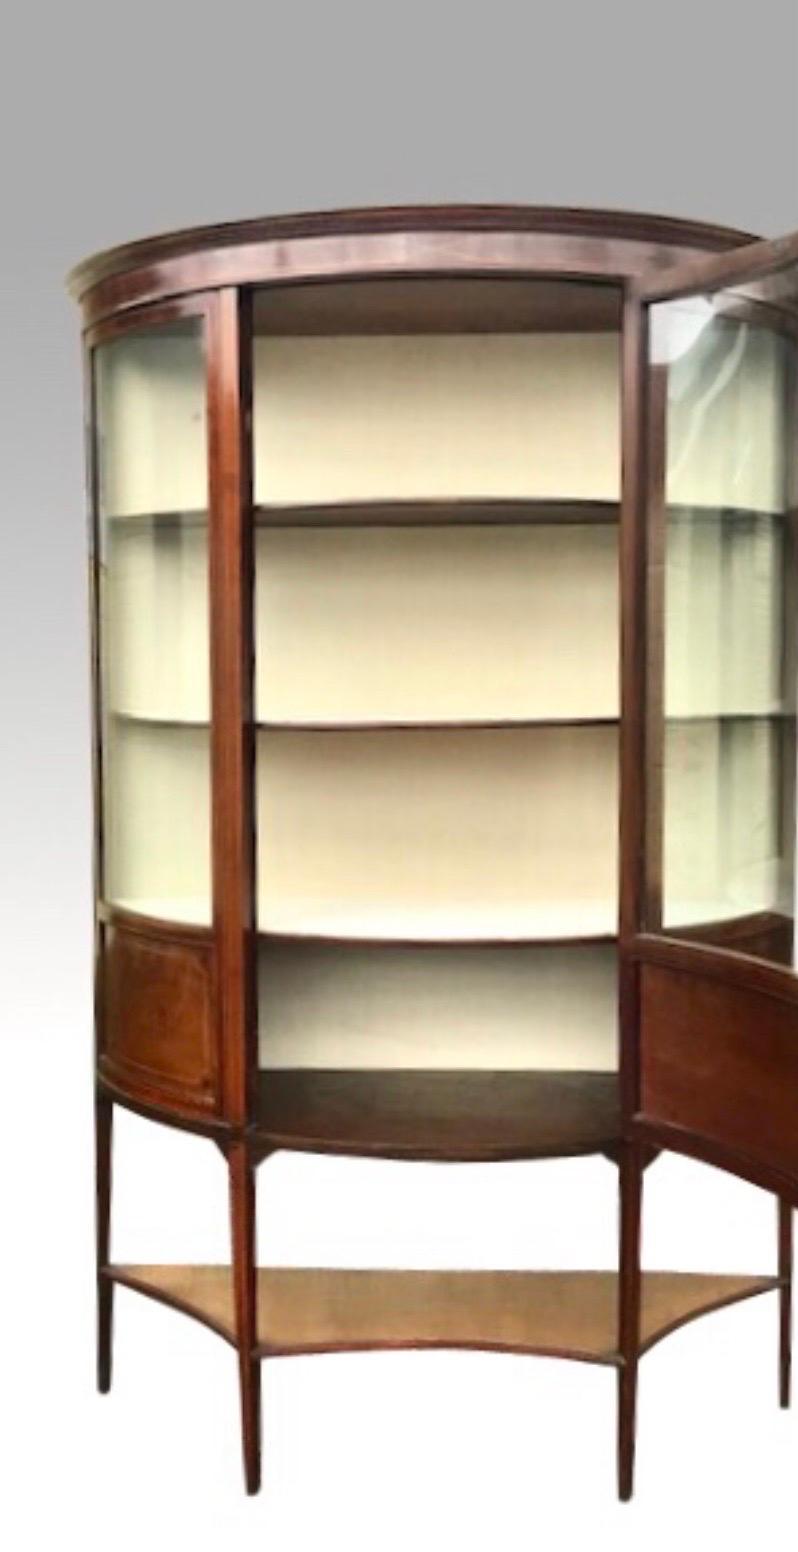 Late 19th Century Bow Fronted Inlaid Mahogany Antique Display Cabinet Vitrine by Maple and Co For Sale